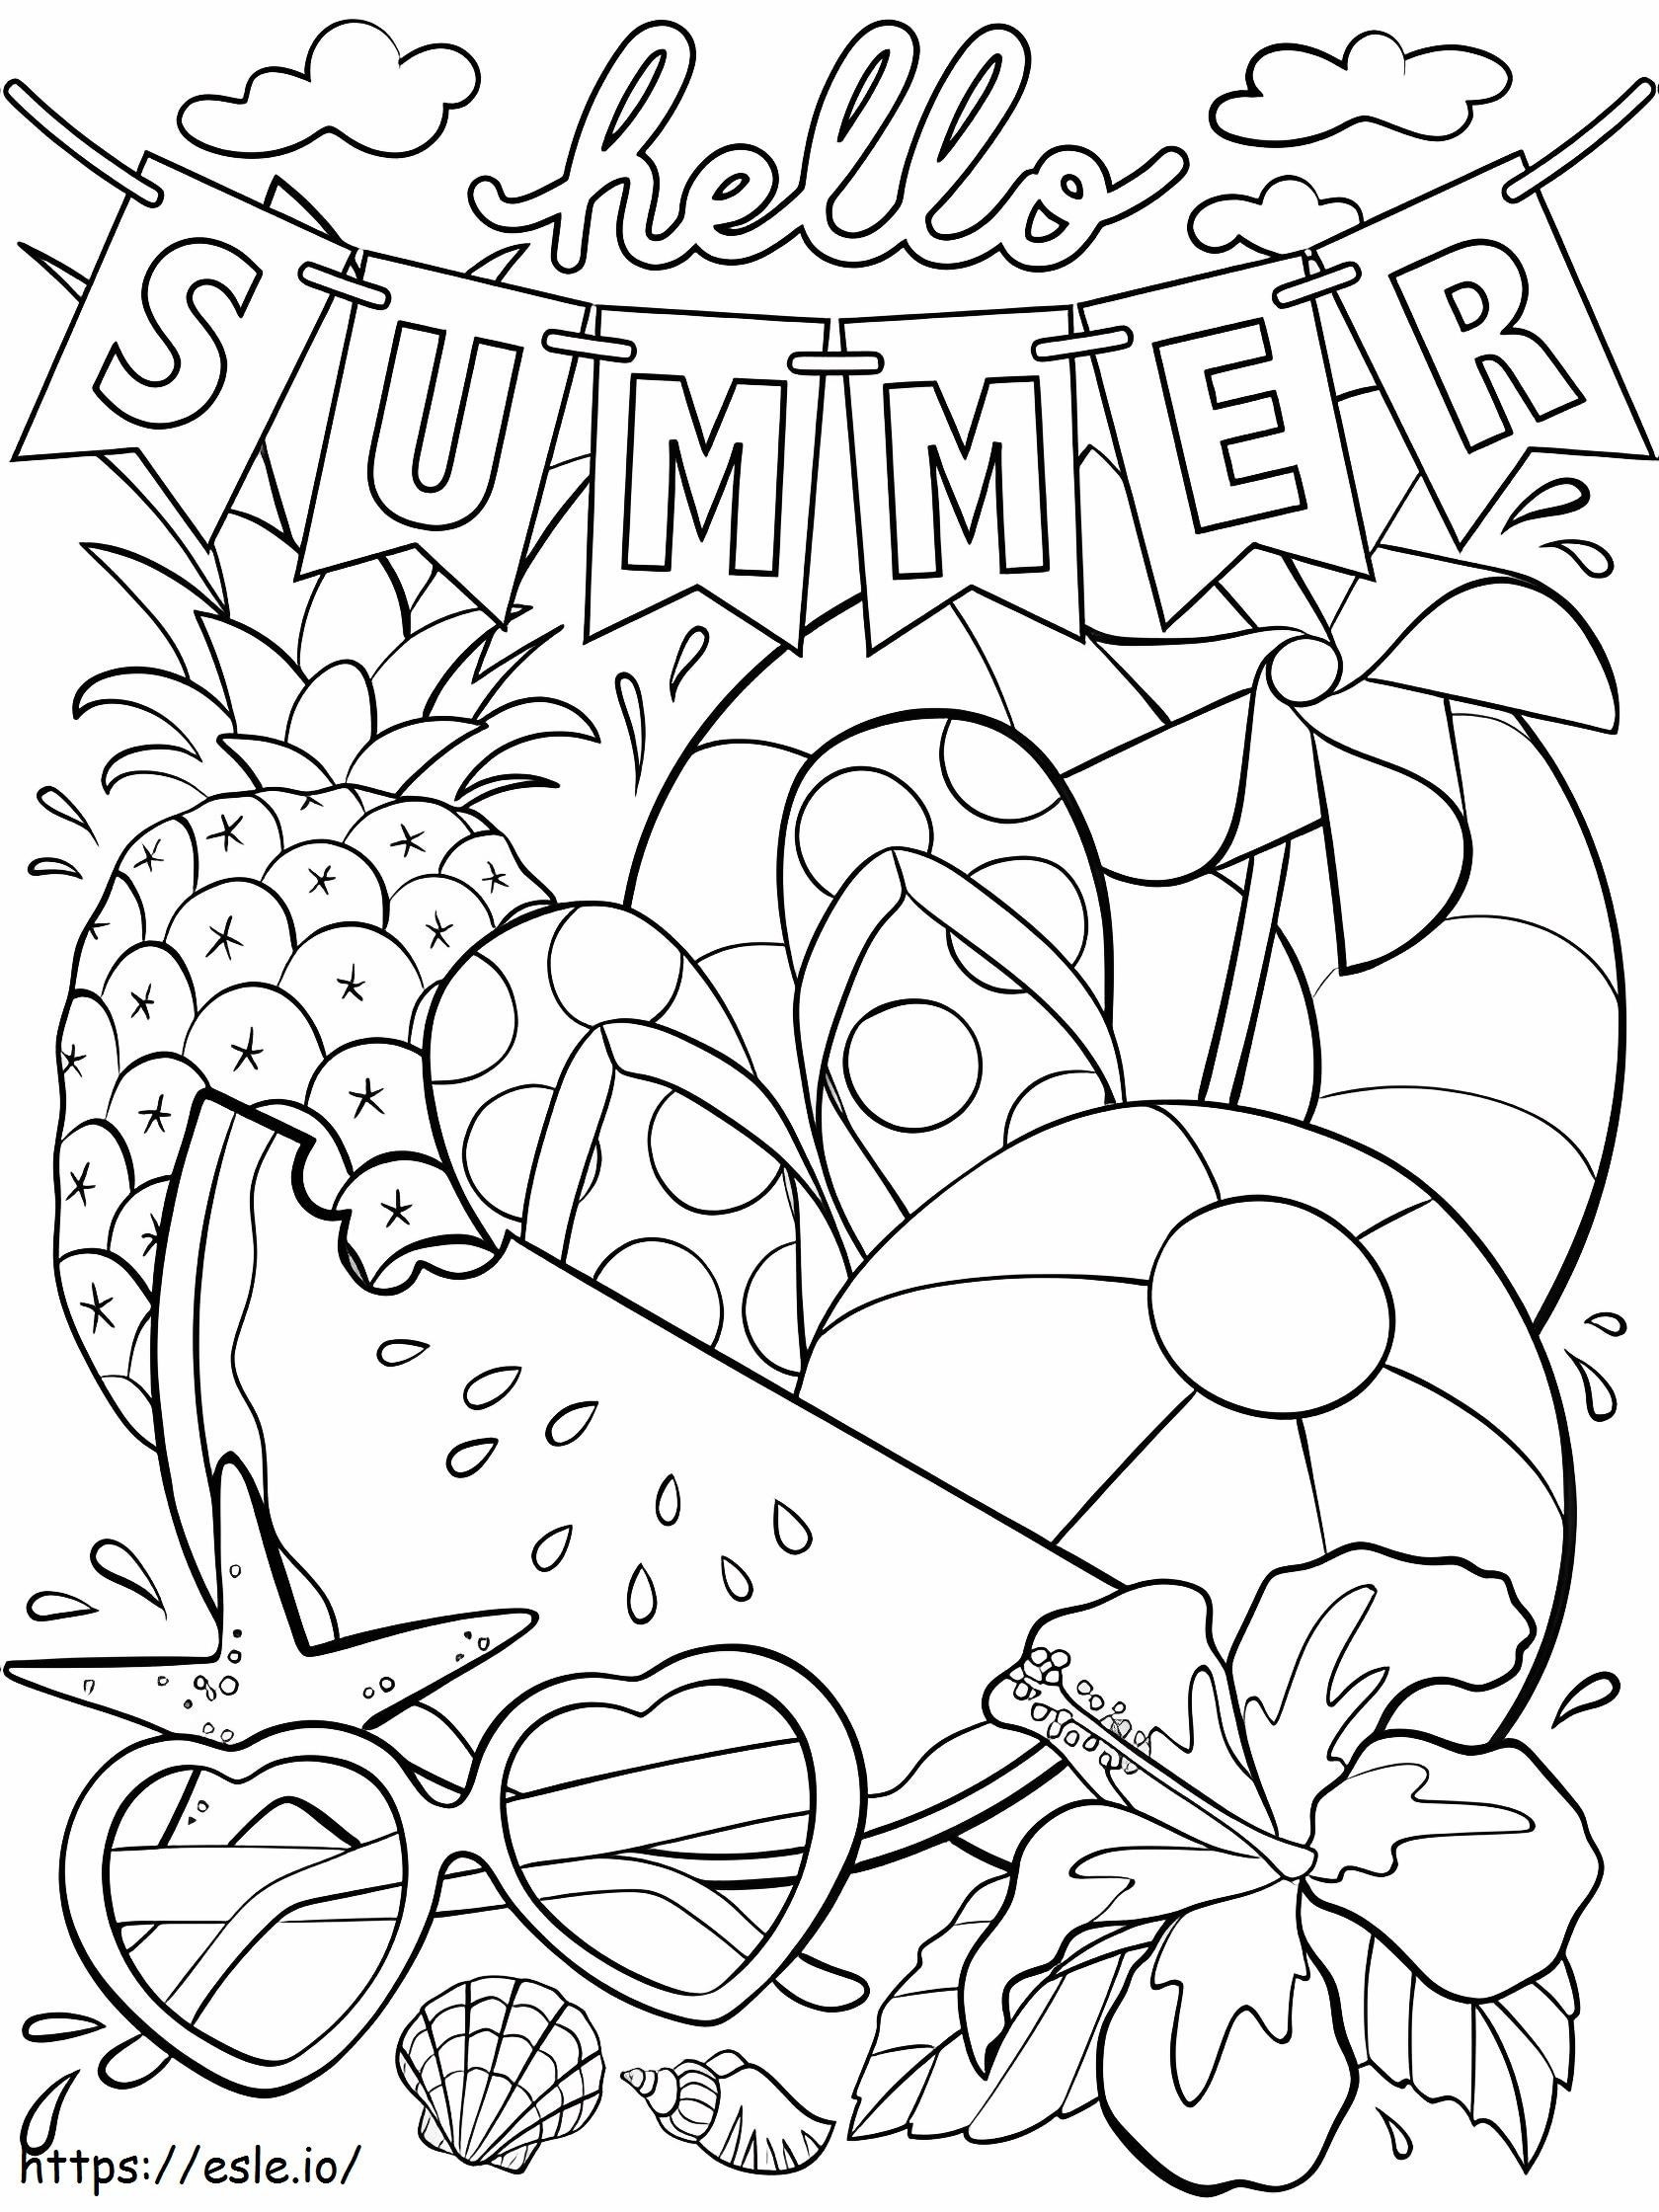 Hello Summer coloring page